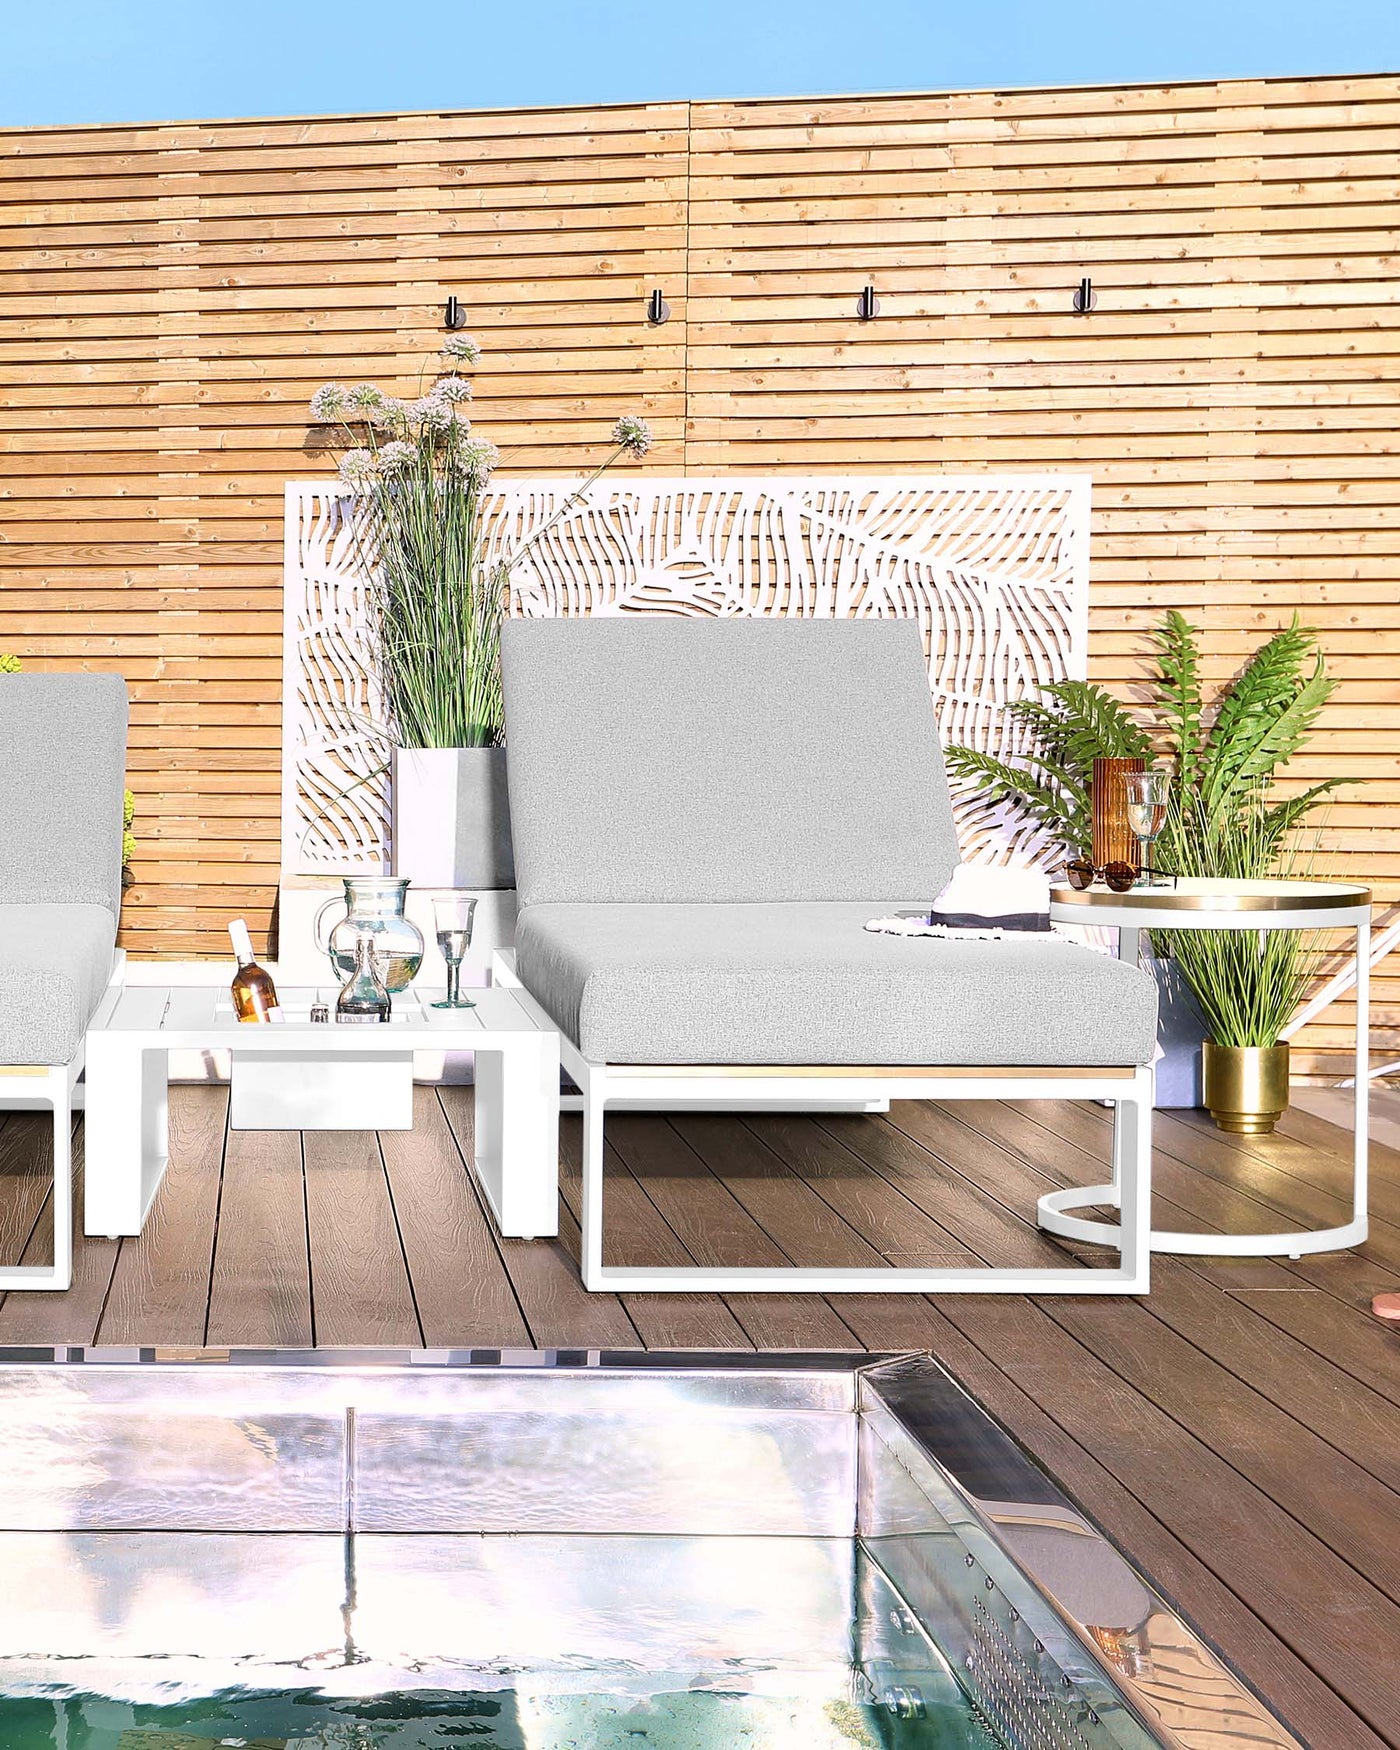 Modern outdoor furniture set on a wooden deck featuring a white-framed sofa with light grey cushions, a matching armchair, a white square coffee table, and a round side table with a golden base. The setting is accessorized with plants, decorative items, and is adjacent to a reflective pool.